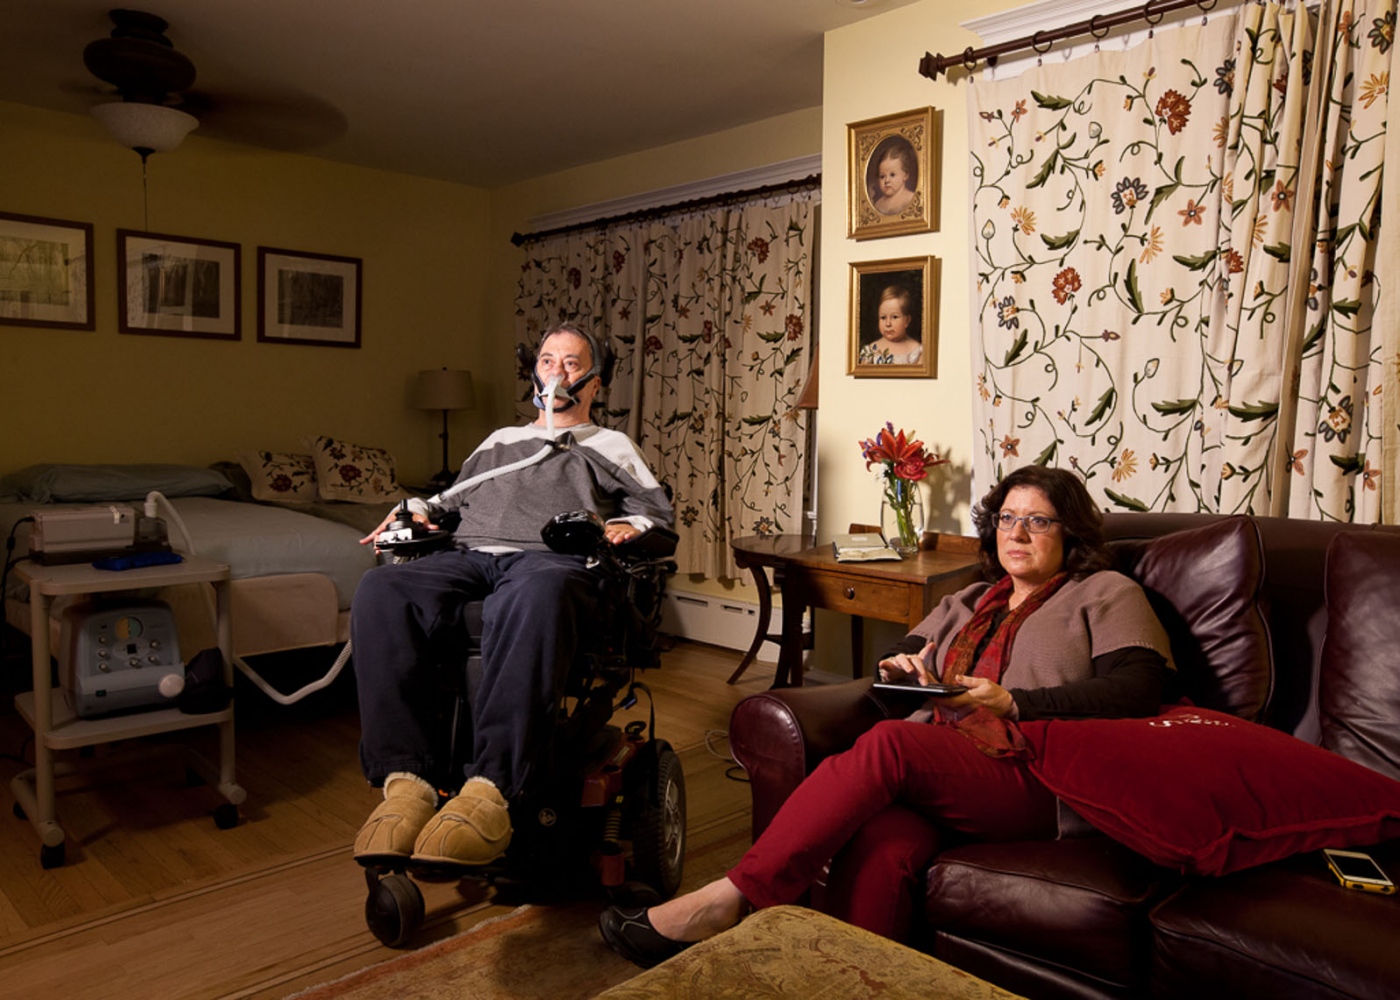 Living with ALS | Money - Steve and Pam enjoy watching television before bed. Steve...